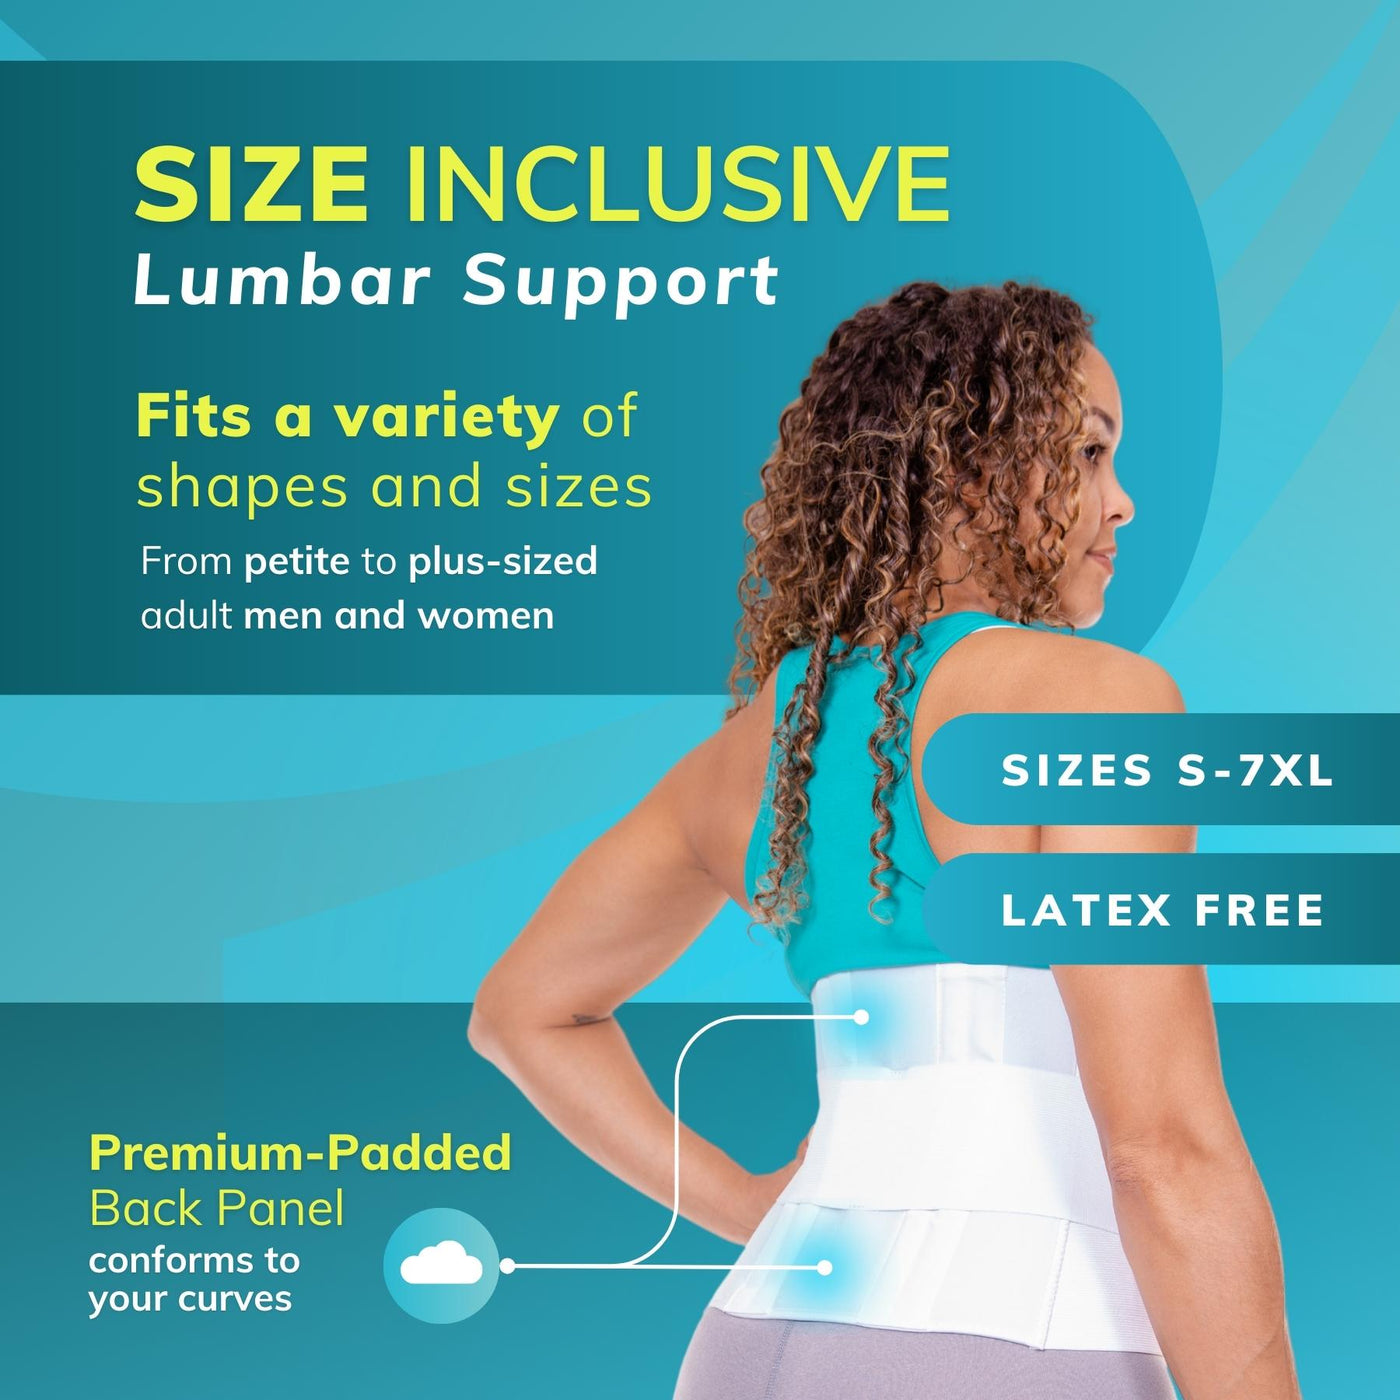 Our back brace is size inclusive fitting a wide variety of plus size shapes and sizes